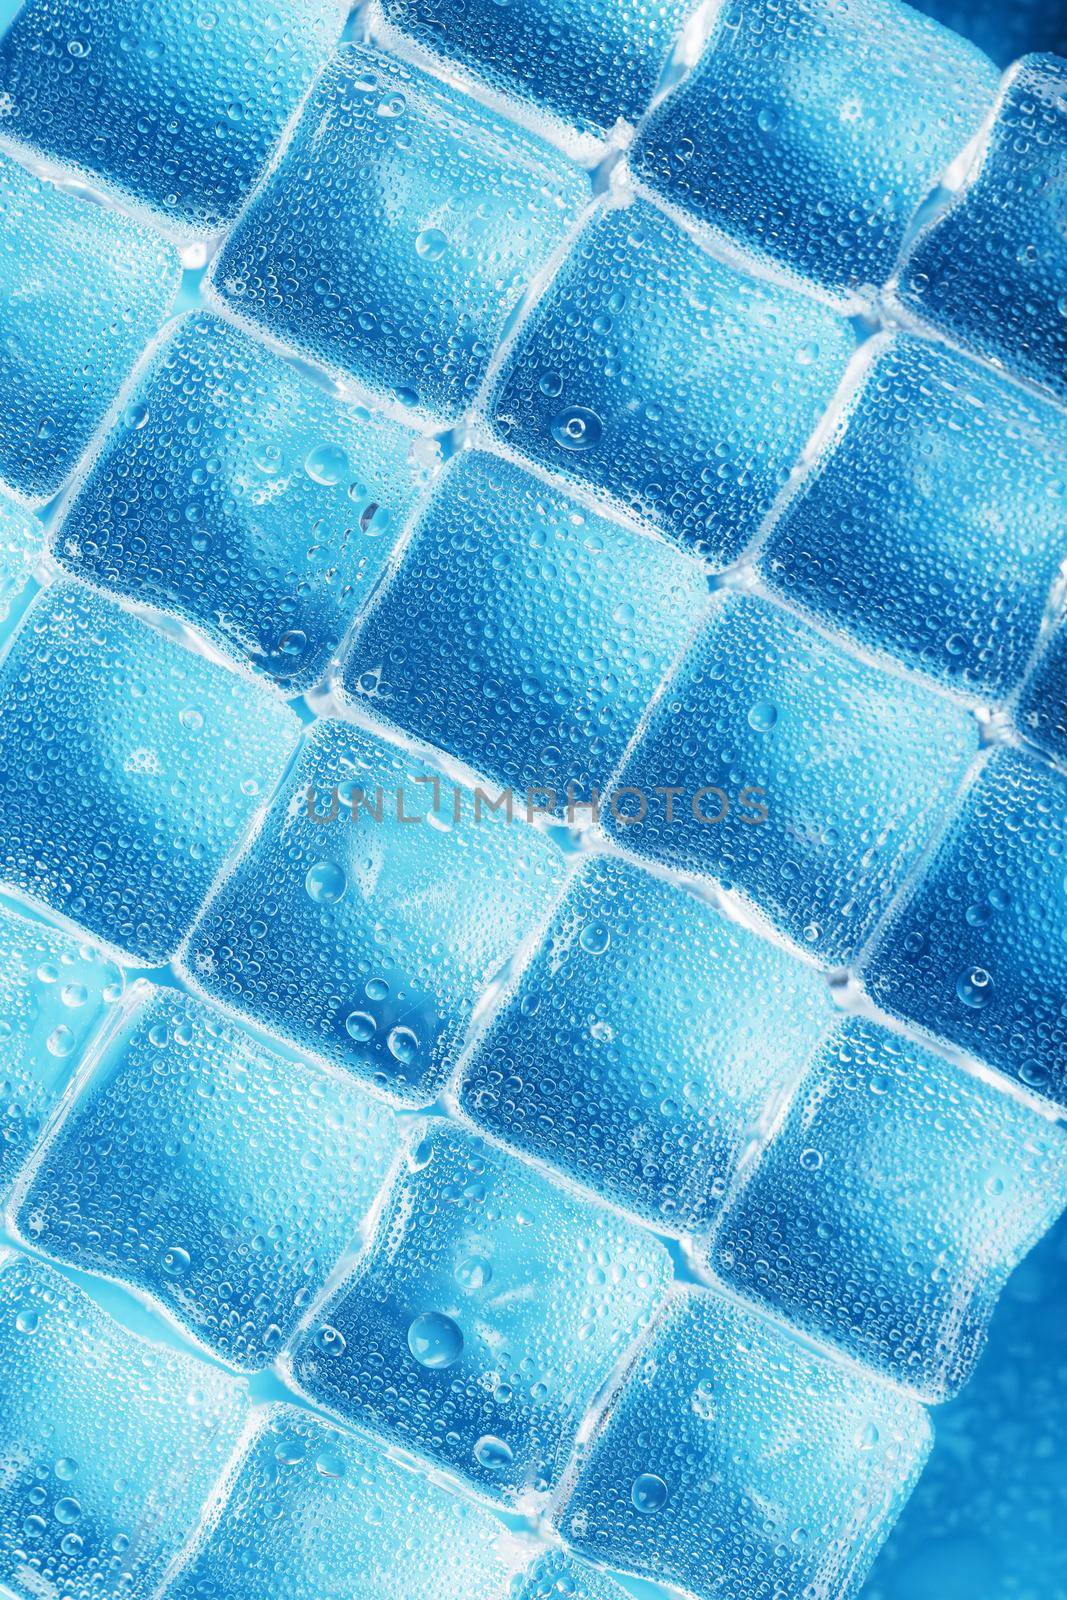 Ice made of cubes lined up with drops on a blue background